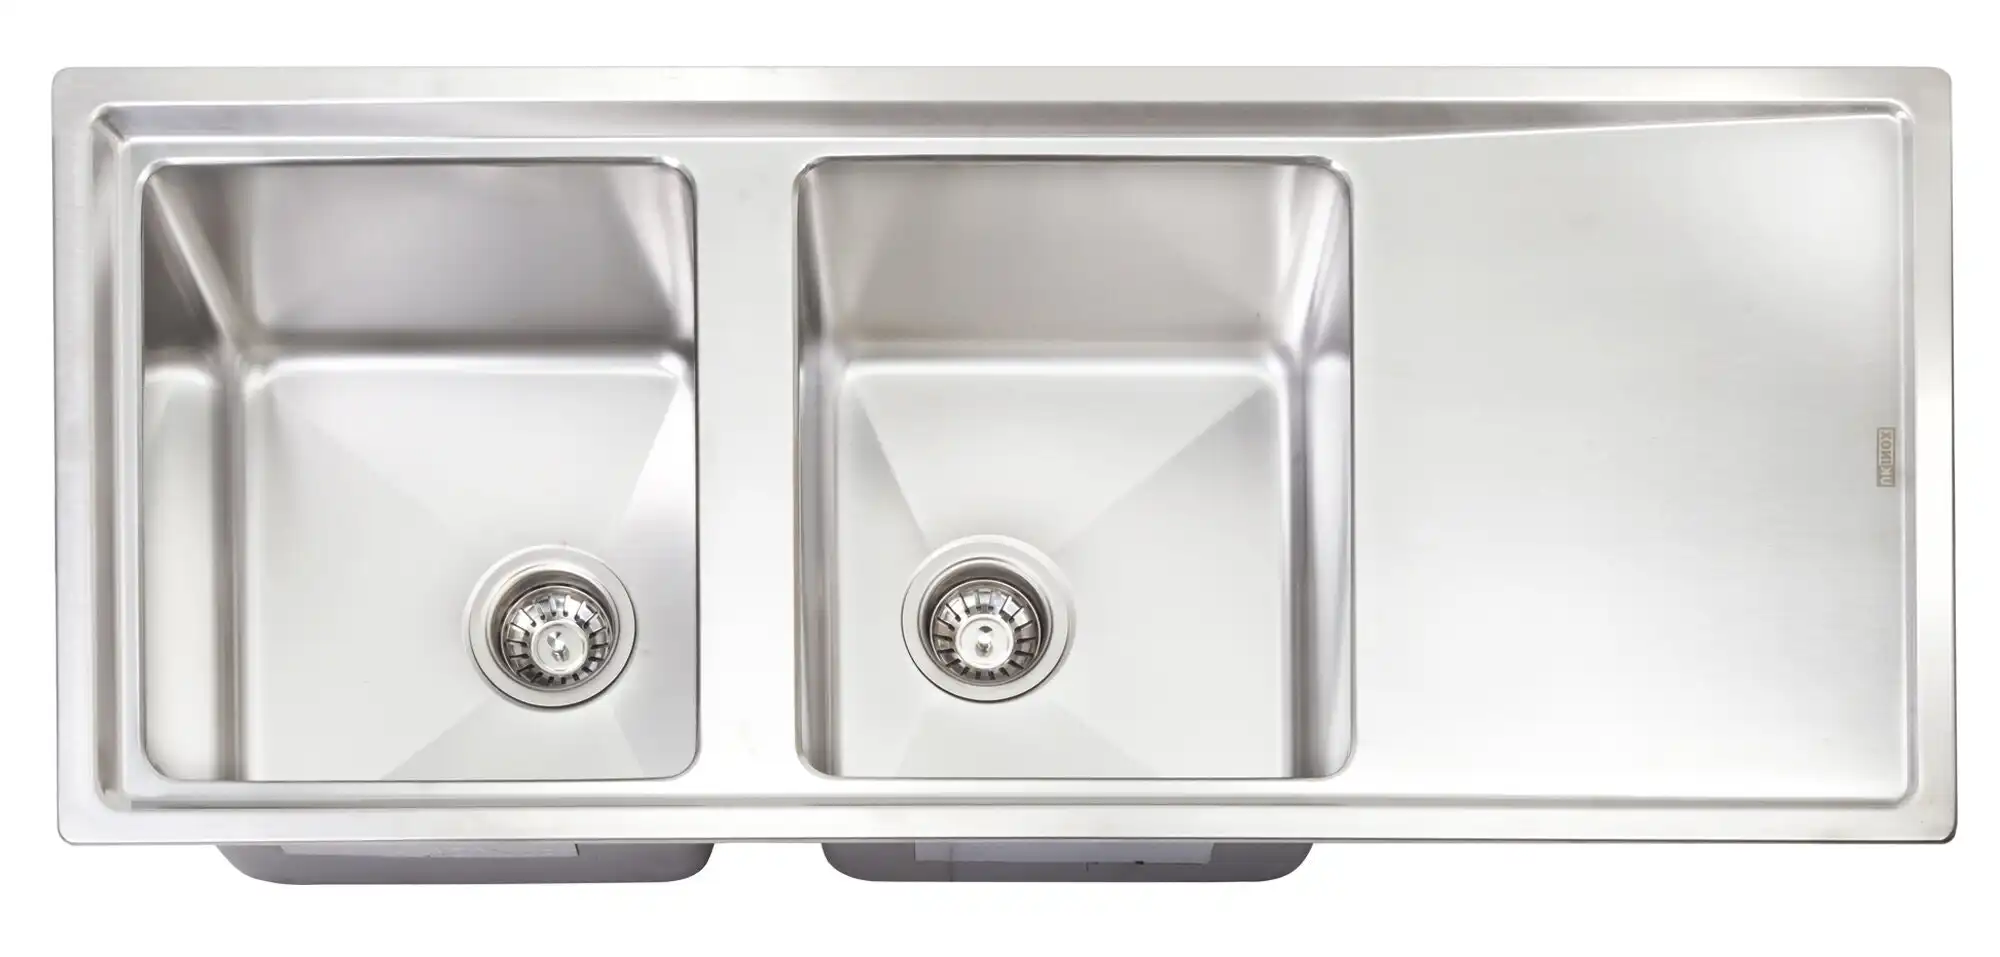 Artusi Mayfair Double Bowl Right Hand Drainer Sink